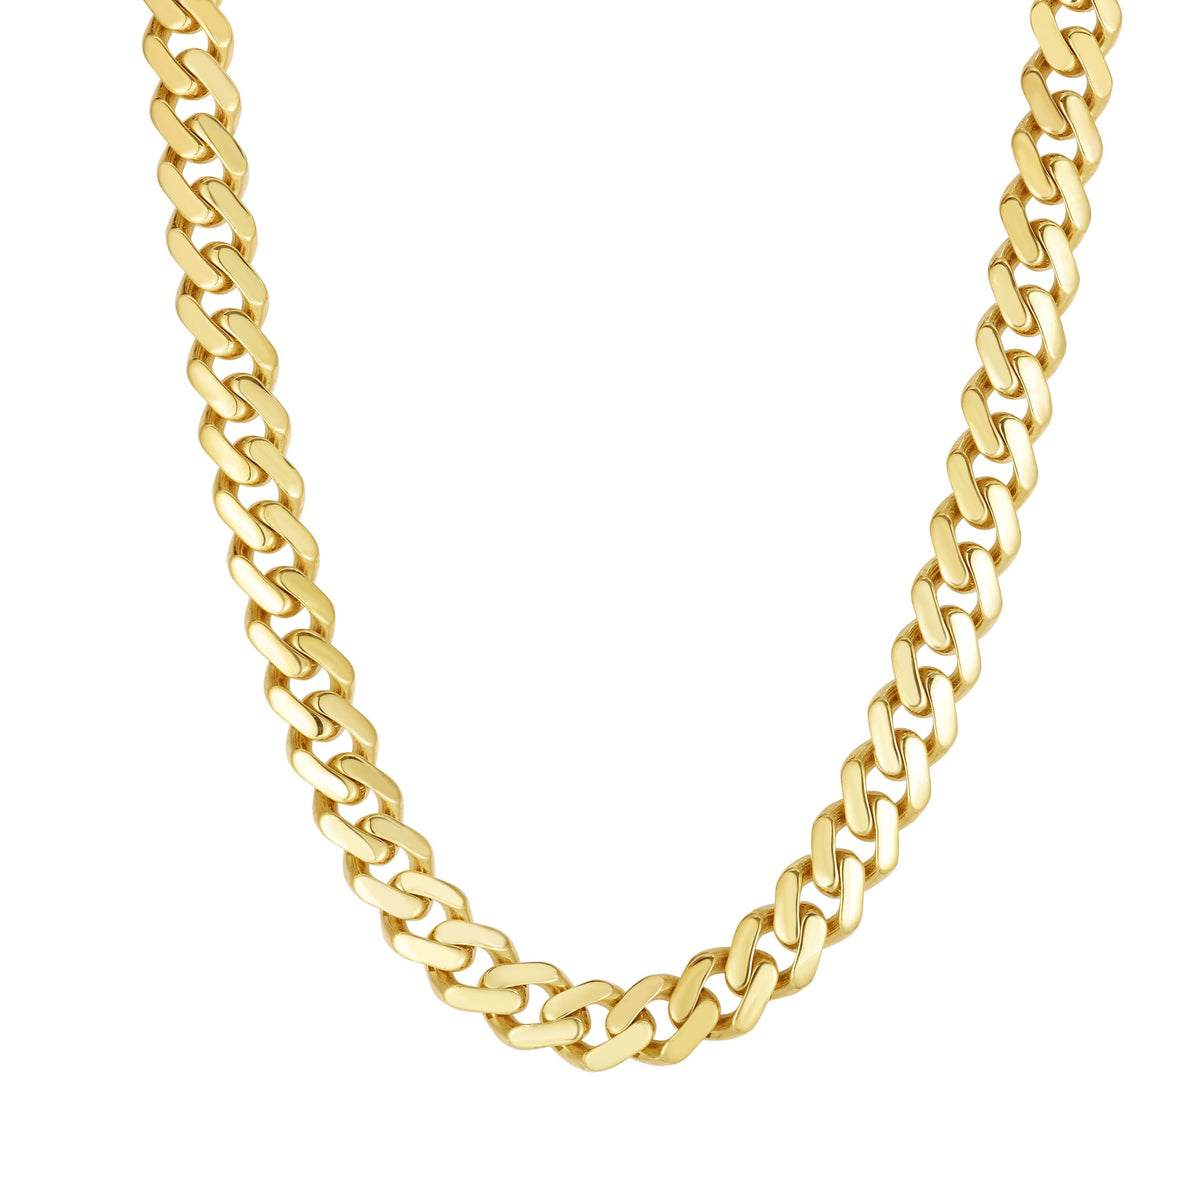 14k Yellow Gold Miami Cuban Link Chain Necklace, Width 9.5mm, 22"